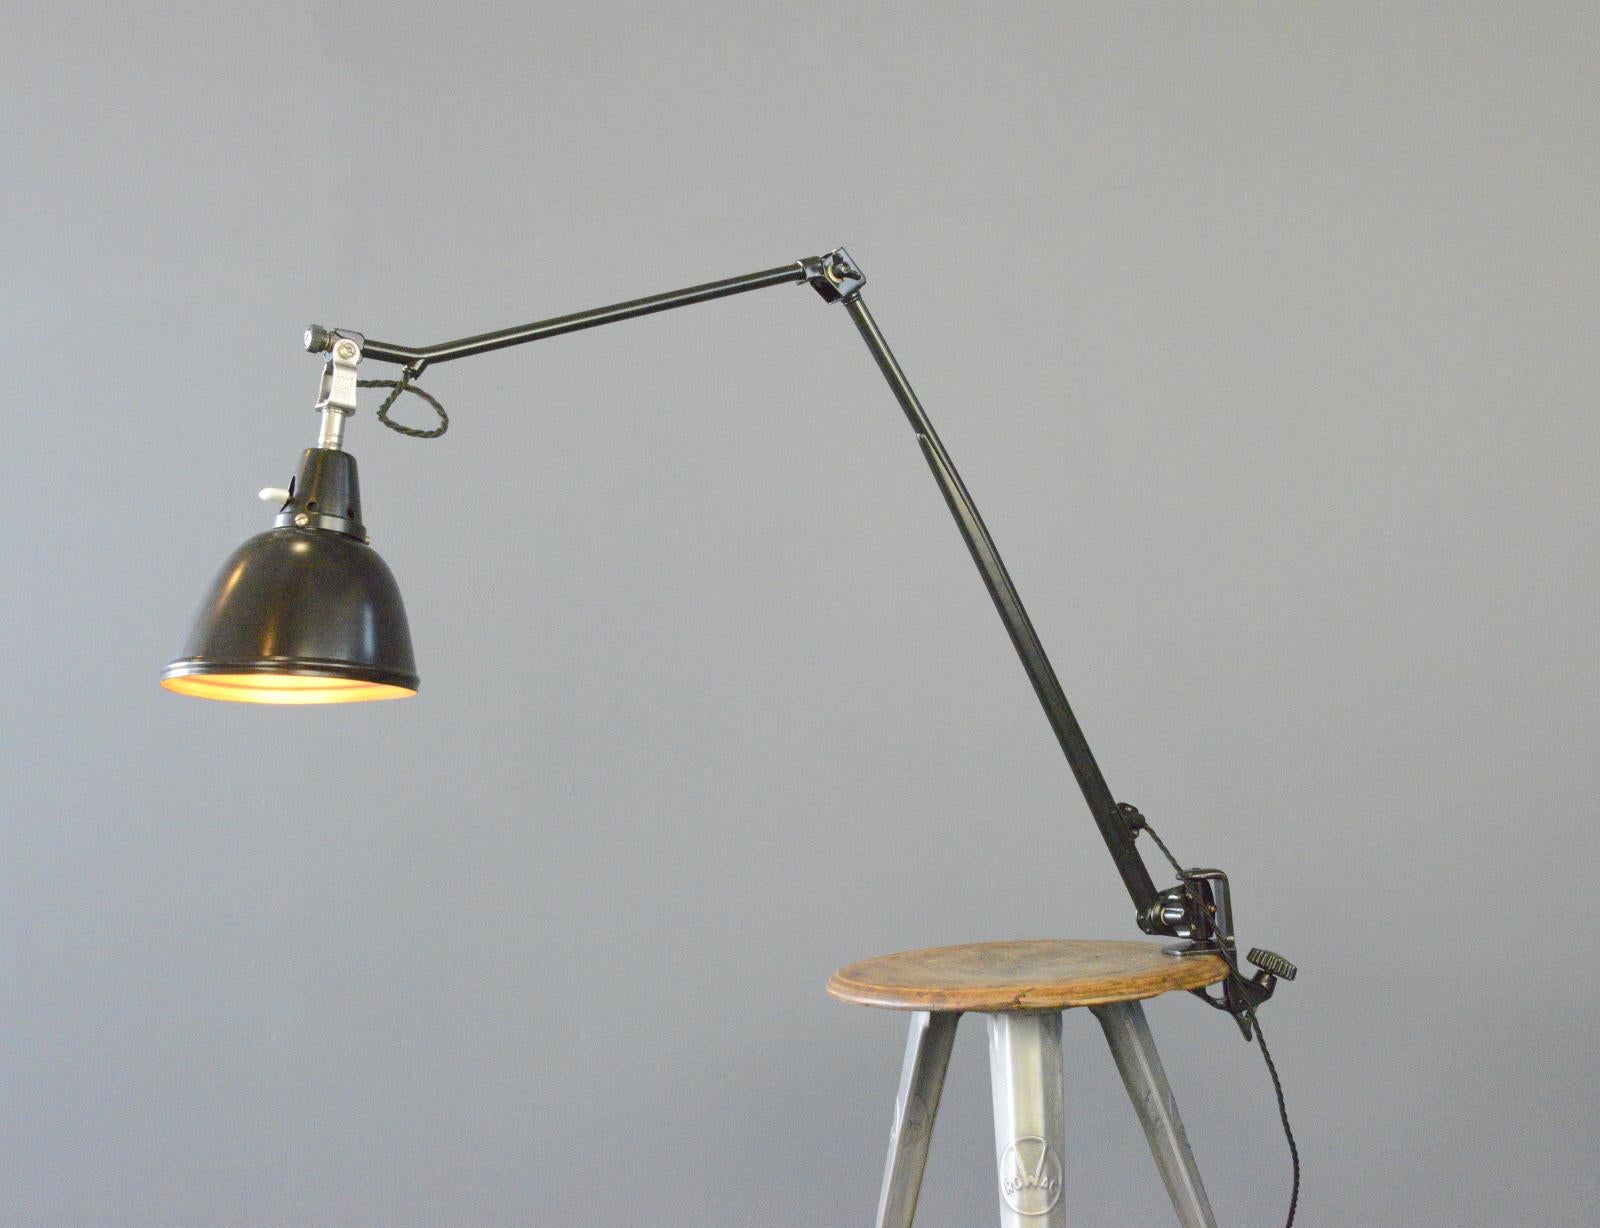 Steel Midgard Typ 114 Table Lamp By Curt Fischer Circa 1930s For Sale